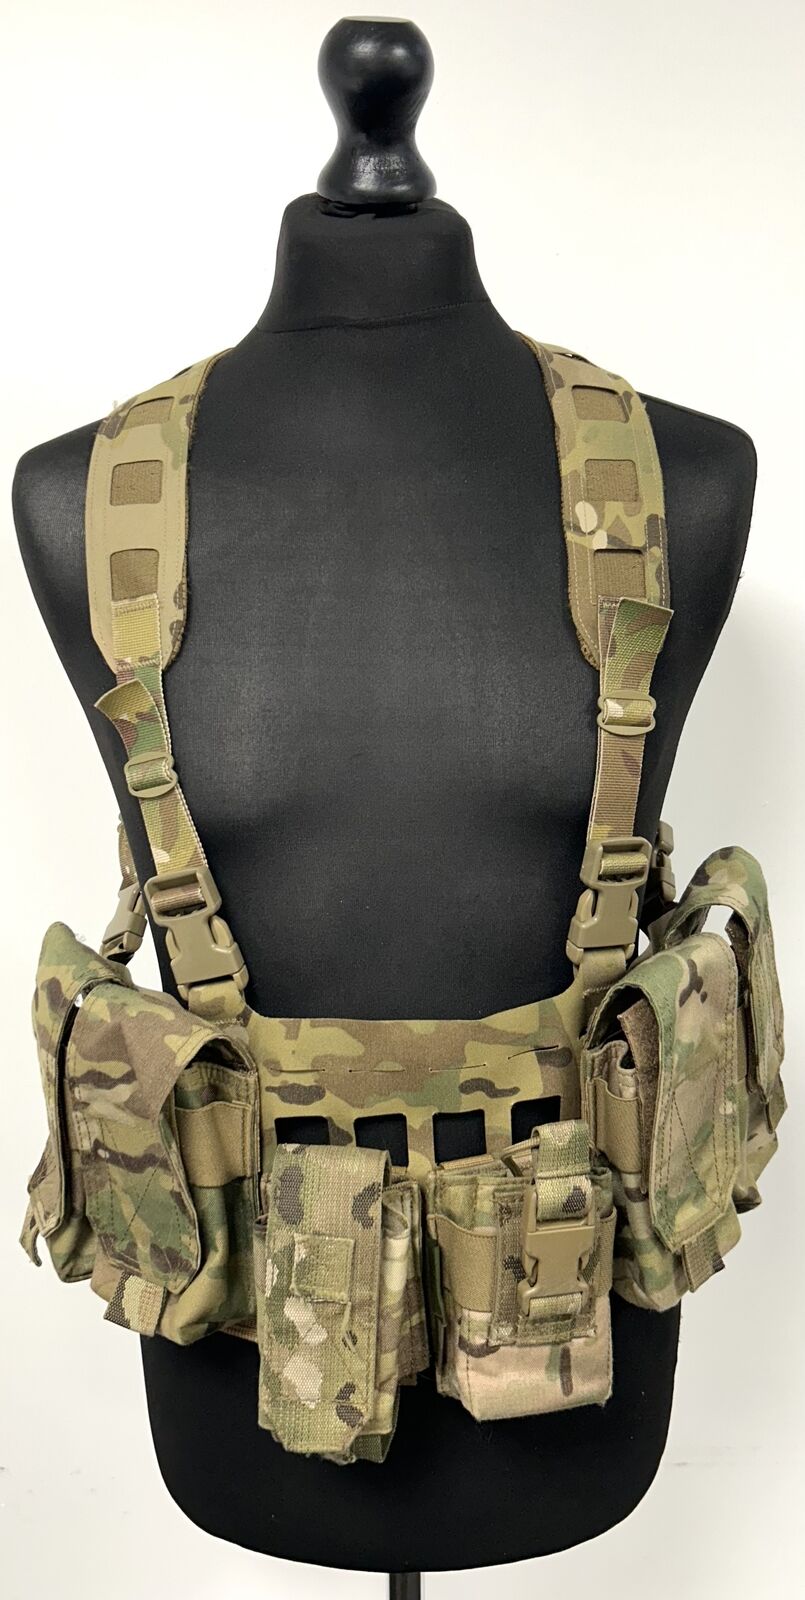 Blue Force Tactical MTP Multicam Chest Rig with Warrior Assault Systems Pouches